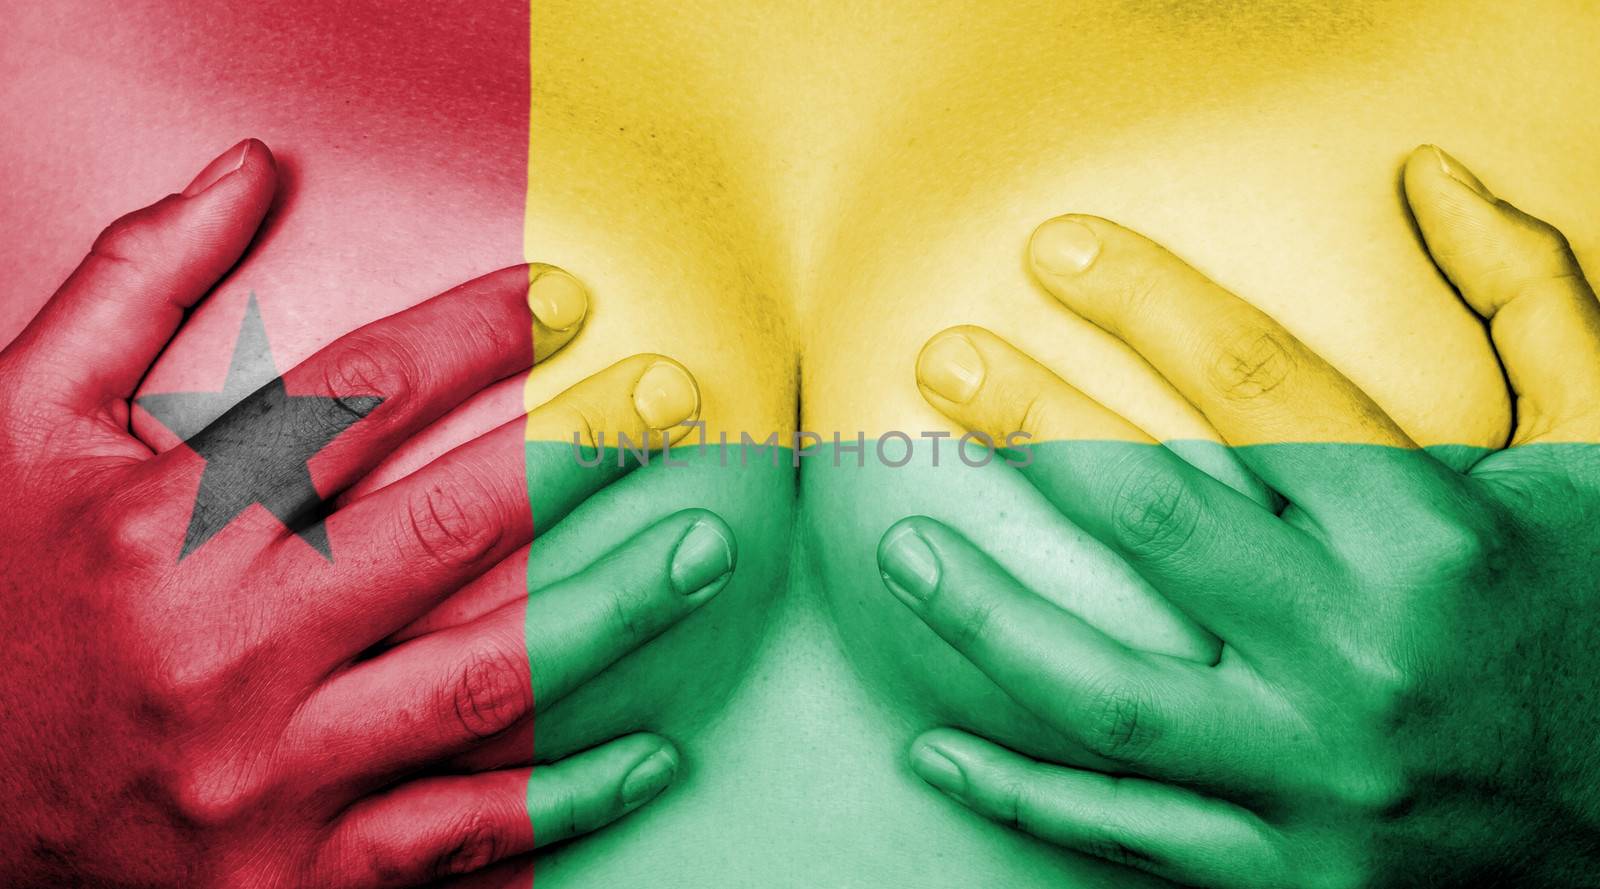 Hands covering breasts by michaklootwijk